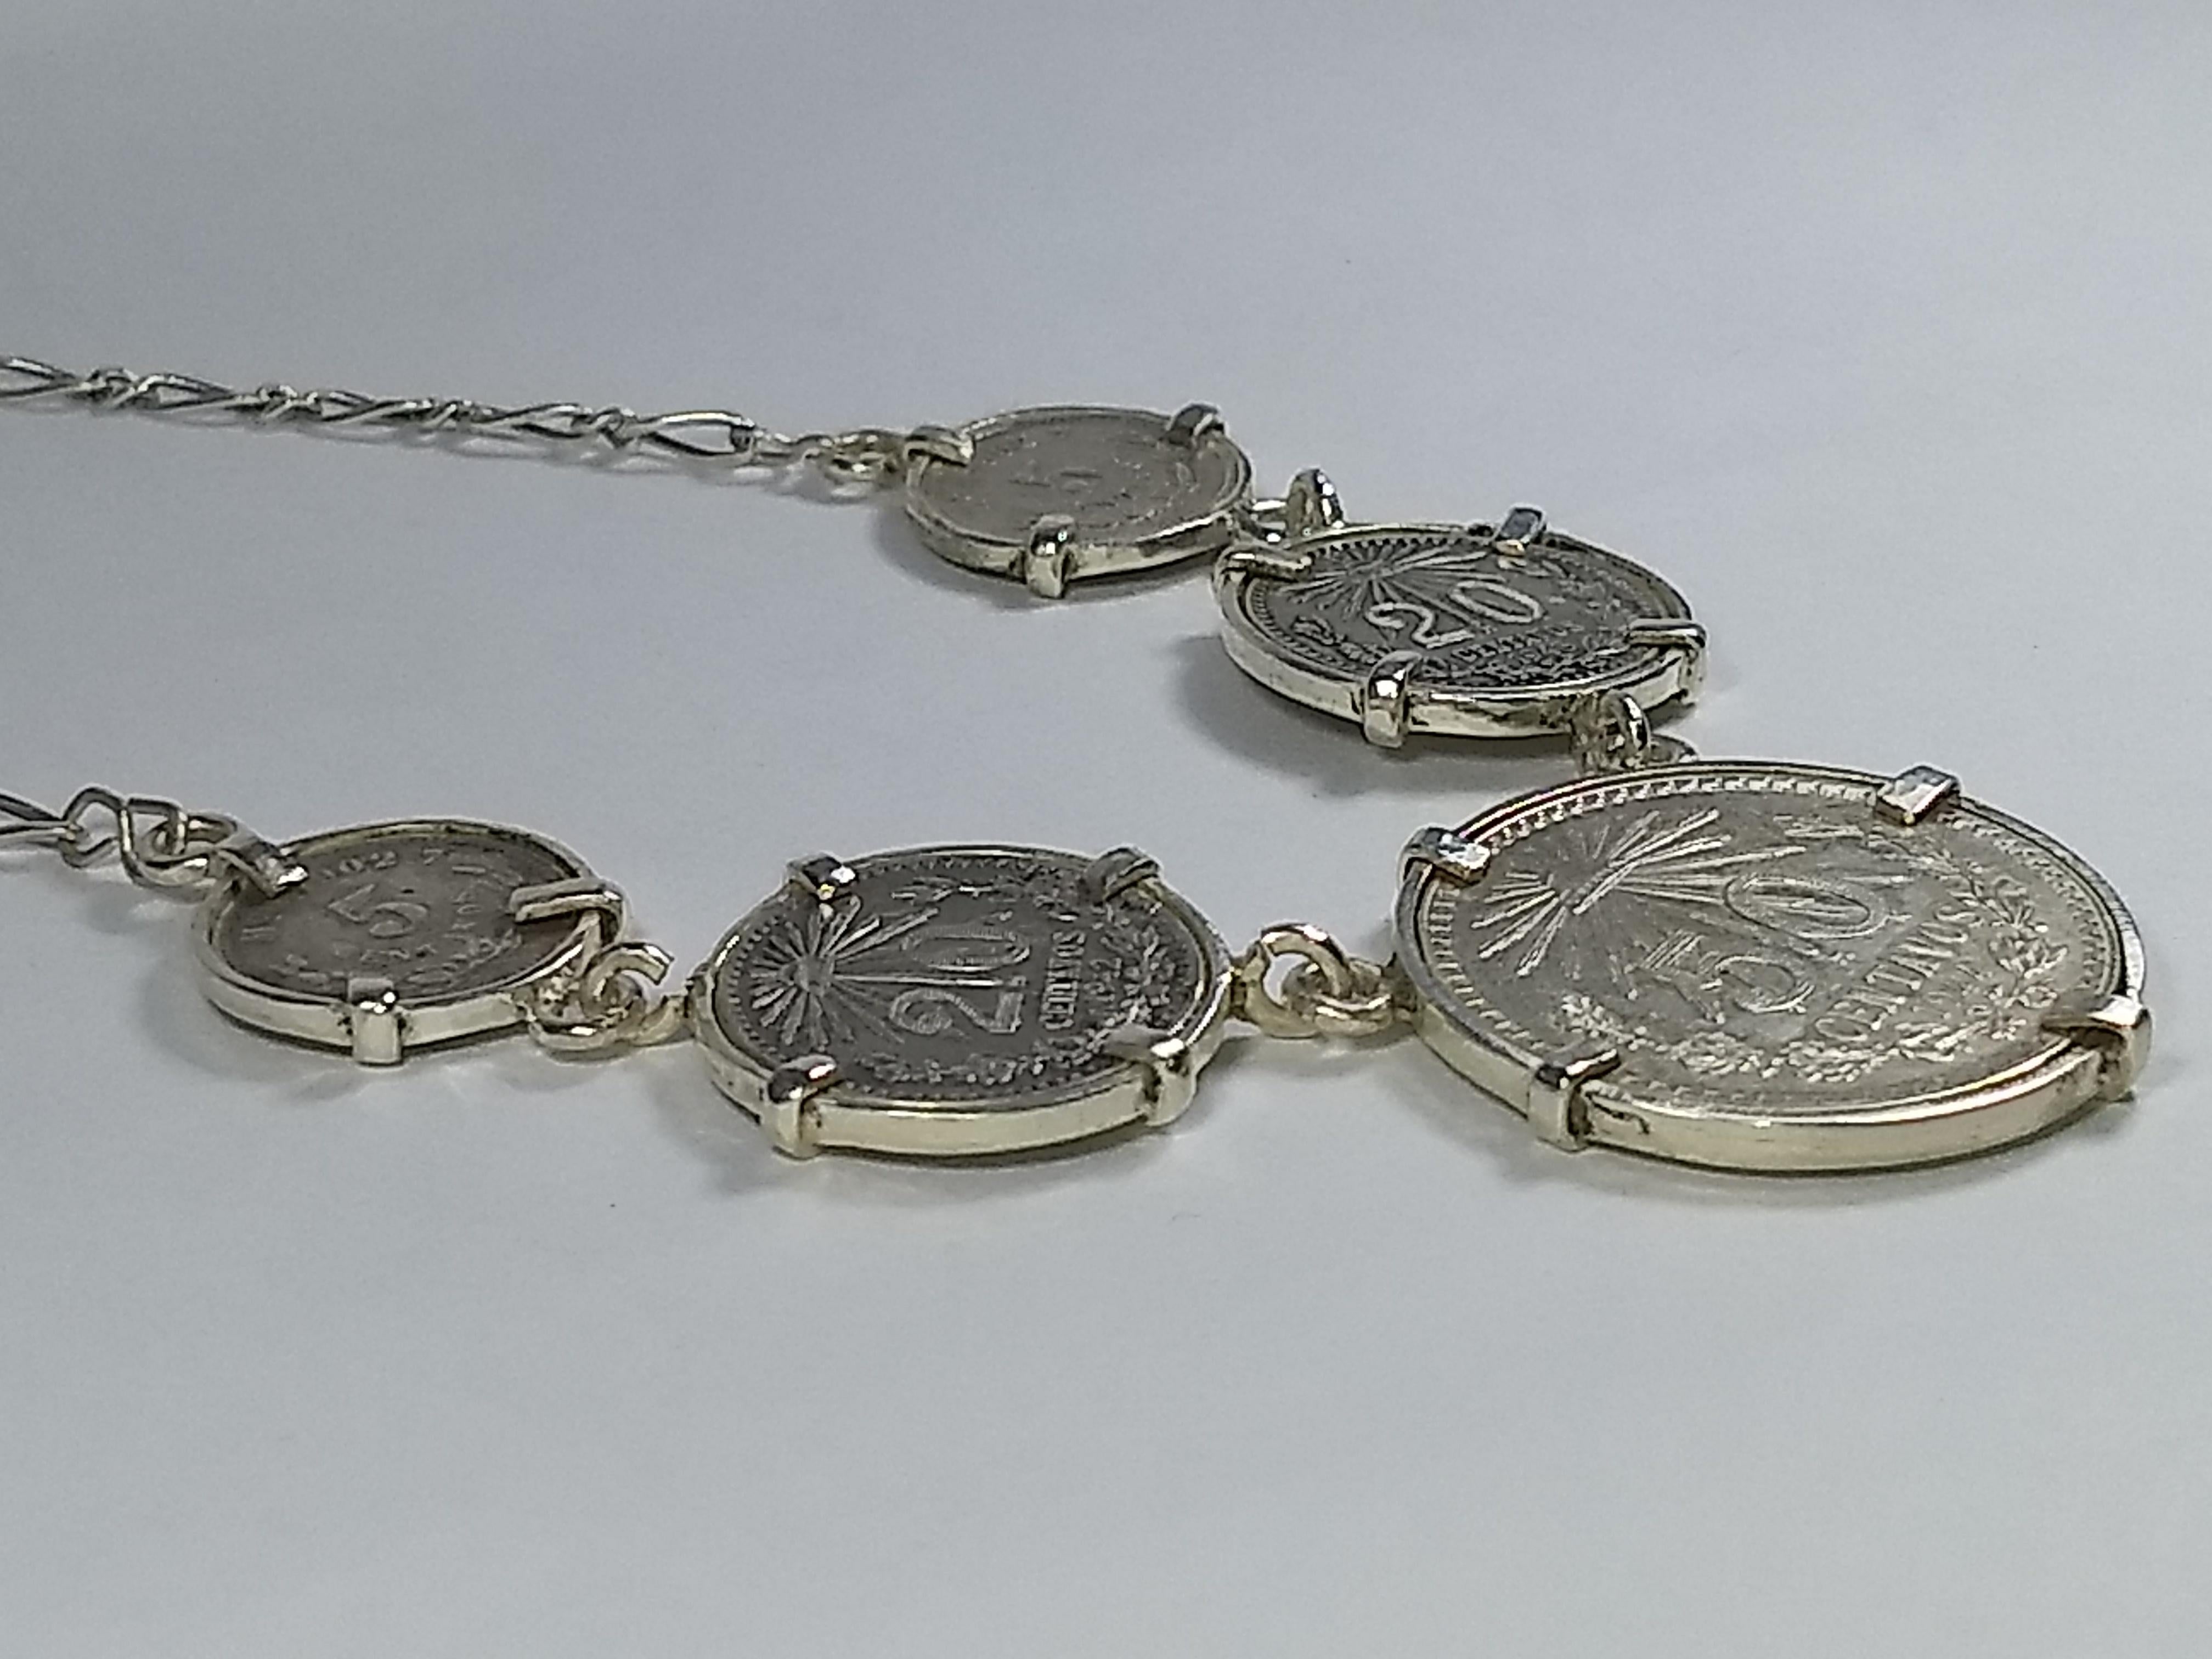 This Alberto Juan one of a kind necklace was handmade from Mexican silver coins with one 50 cent coin, two 20 cent coins, and two 5 cent coins of silver .720.,  The chain and findings used in this piece are sterling silver. Necklace measures 17